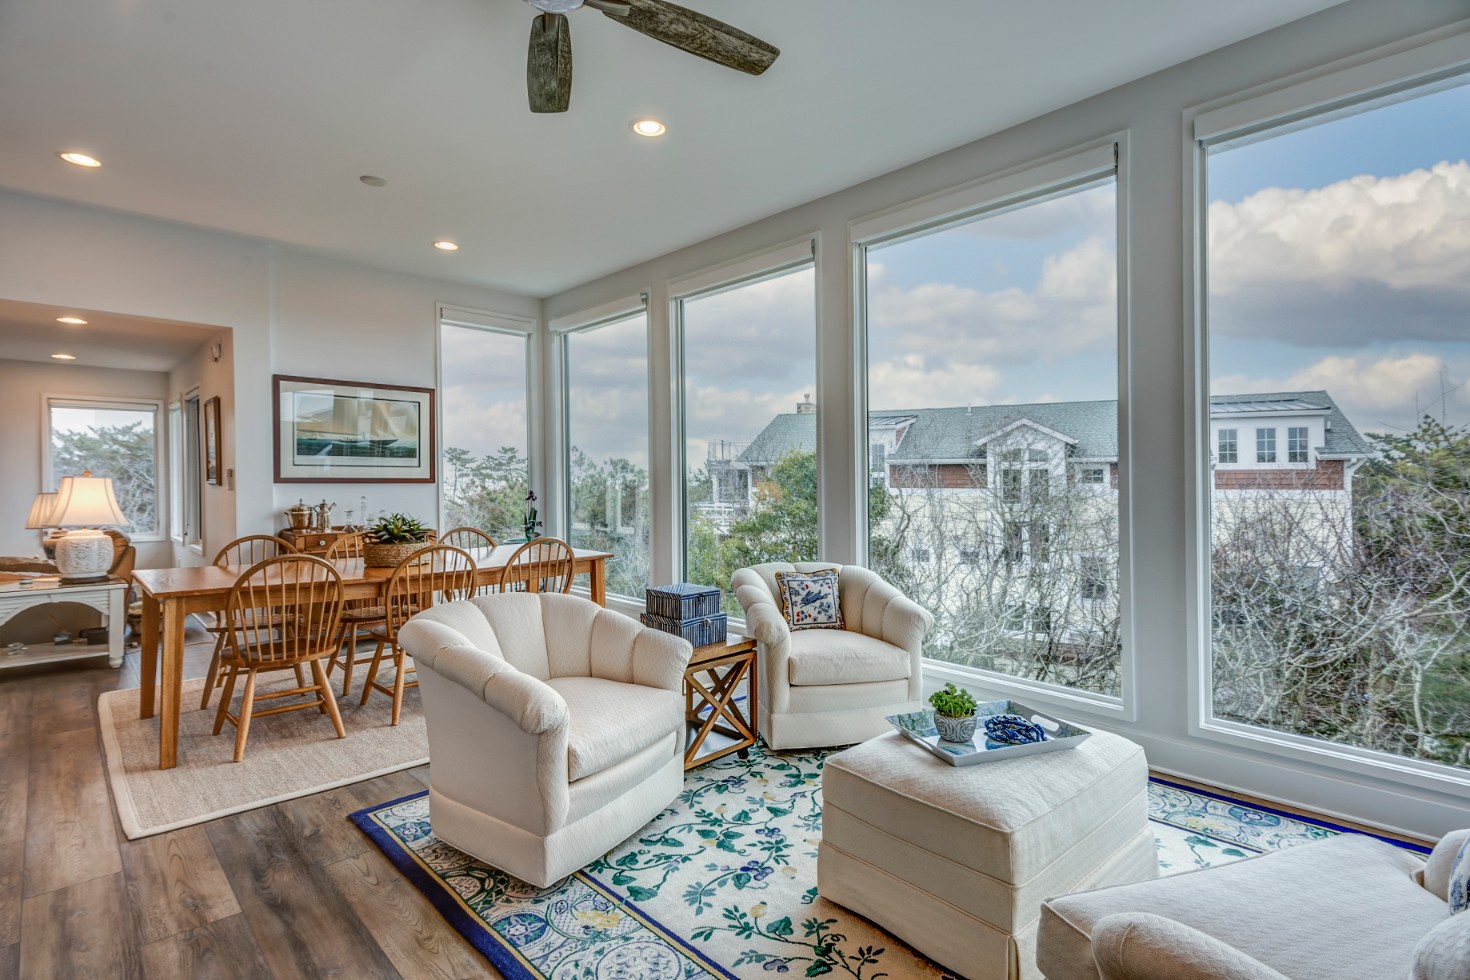 Cotton Patch Hills Renovation in Bethany Beach DE - Great Room with Large Windows and Medium Wood Flooring